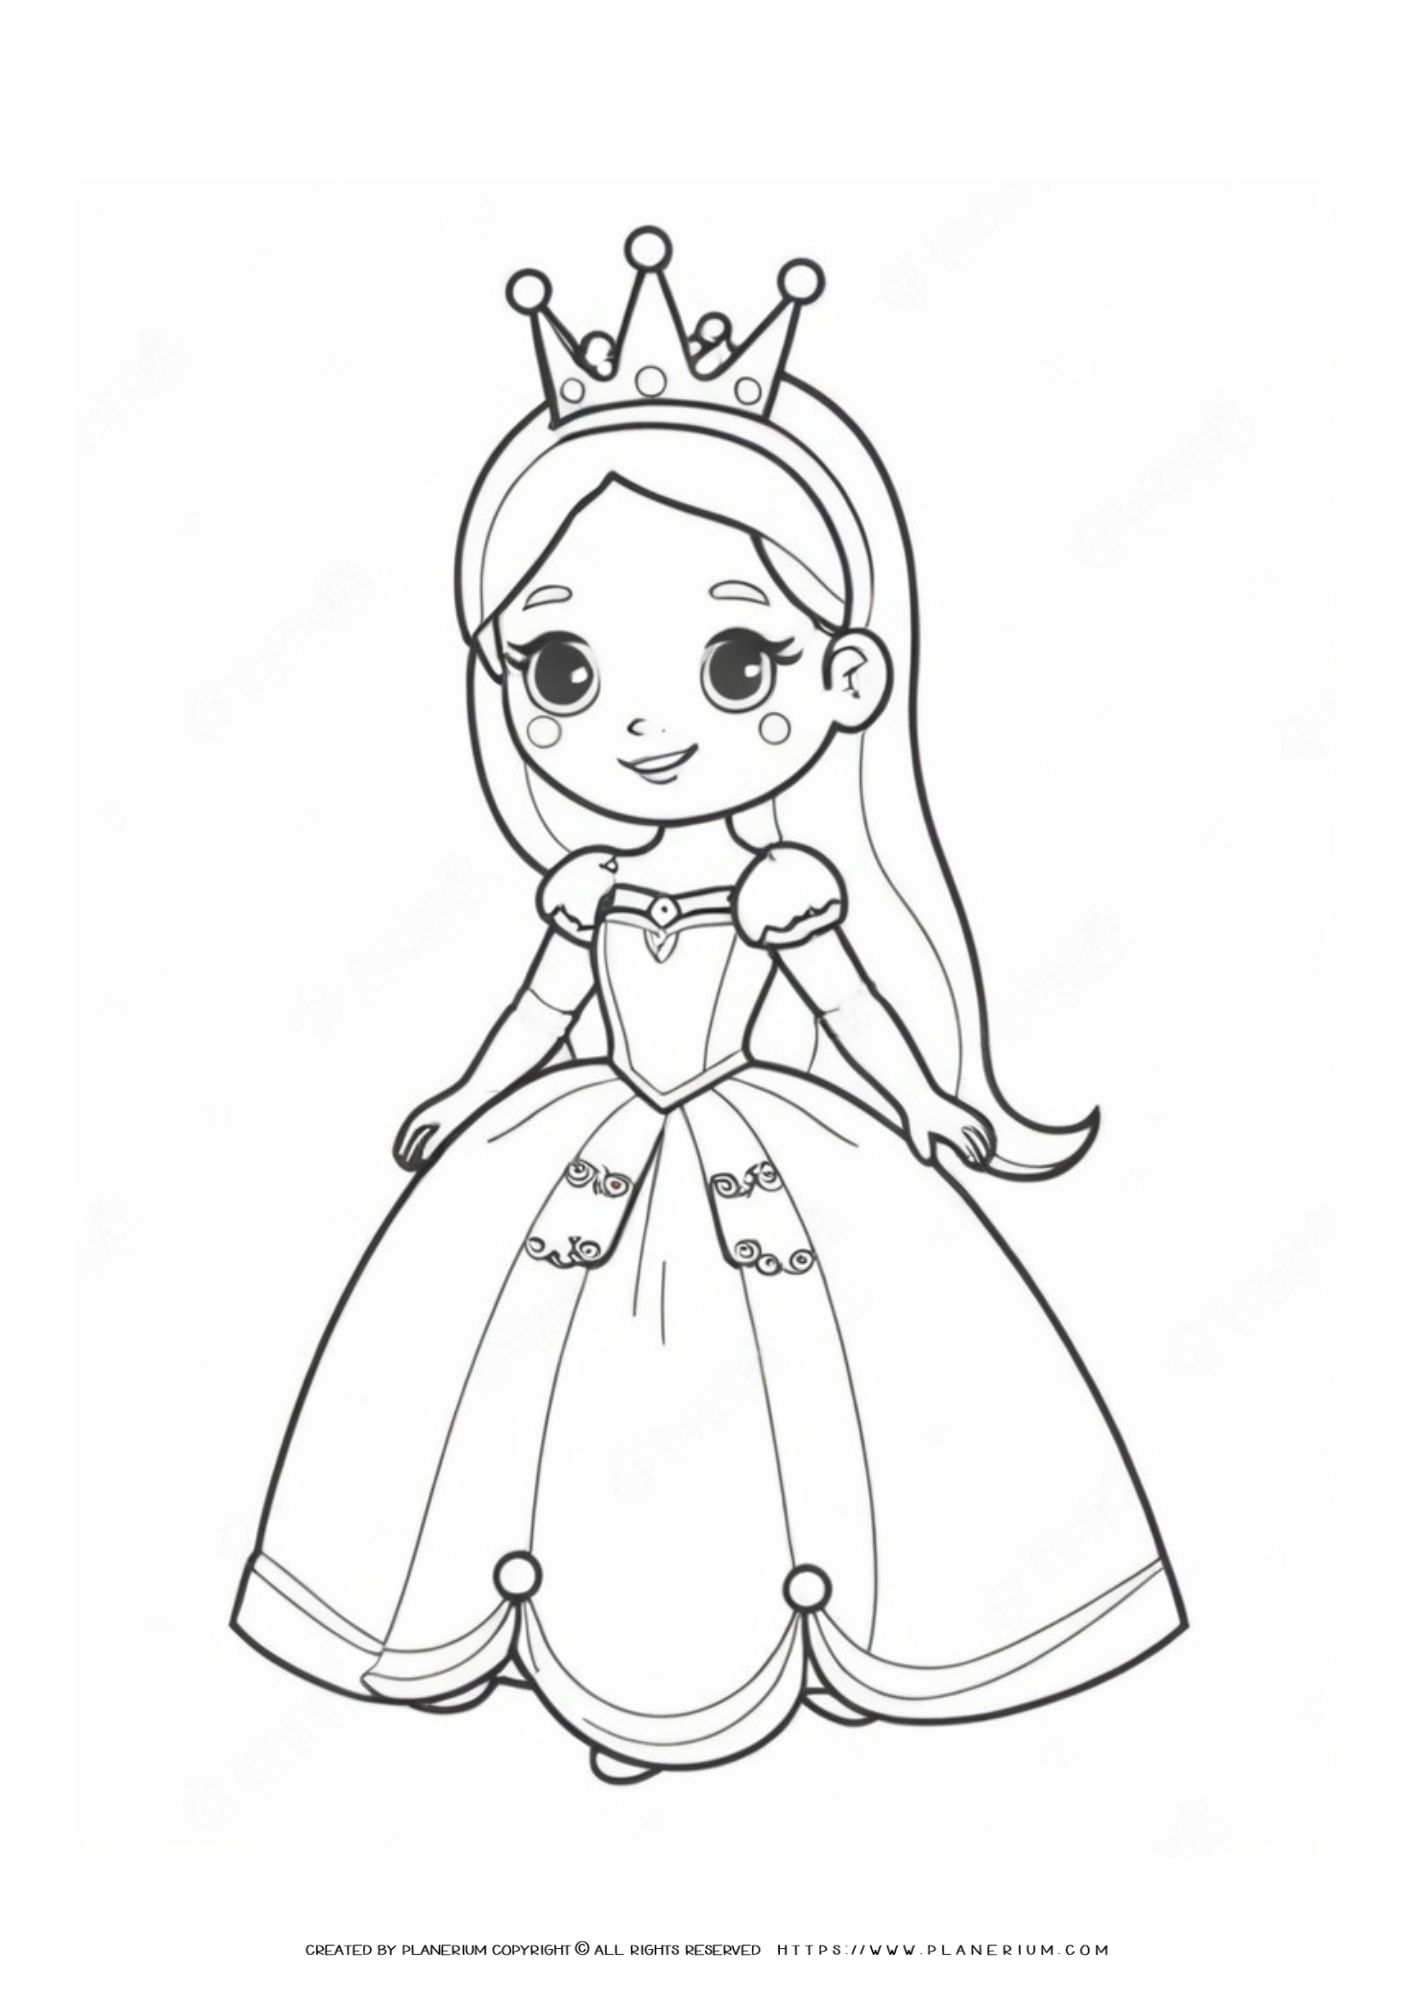 Enchanting Fairytale-Themed Printable Coloring Page for Kids